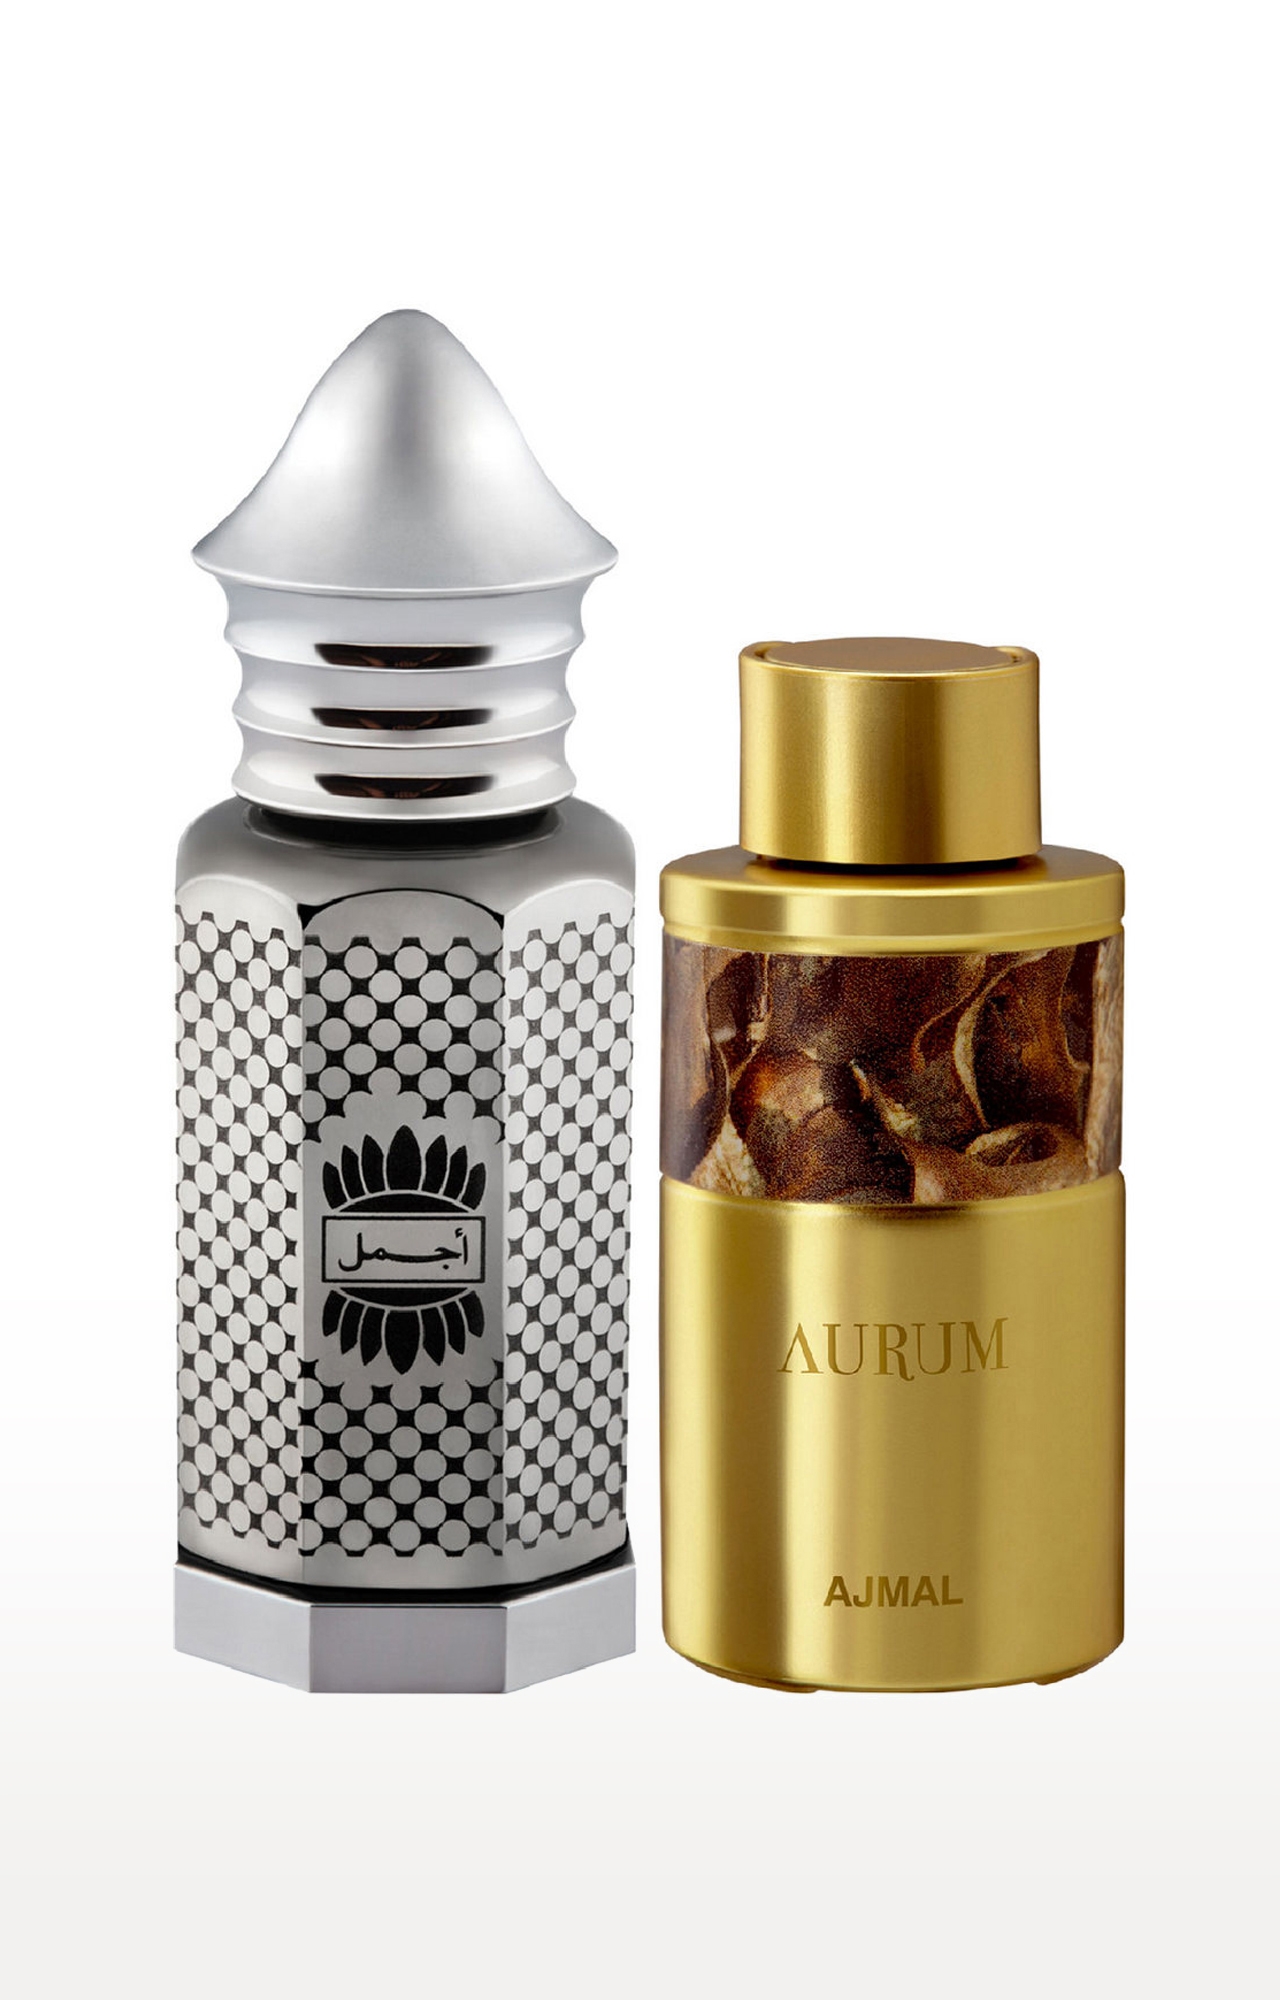 Ajmal | Ajmal Asher Concentrated Perfume Oil Oriental Alcohol-free Attar 12ml for Unisex and Aurum Concentrated Perfume Oil Fruity Floral Alcohol-free Attar 10ml for Women + 2 Parfum Testers FREE